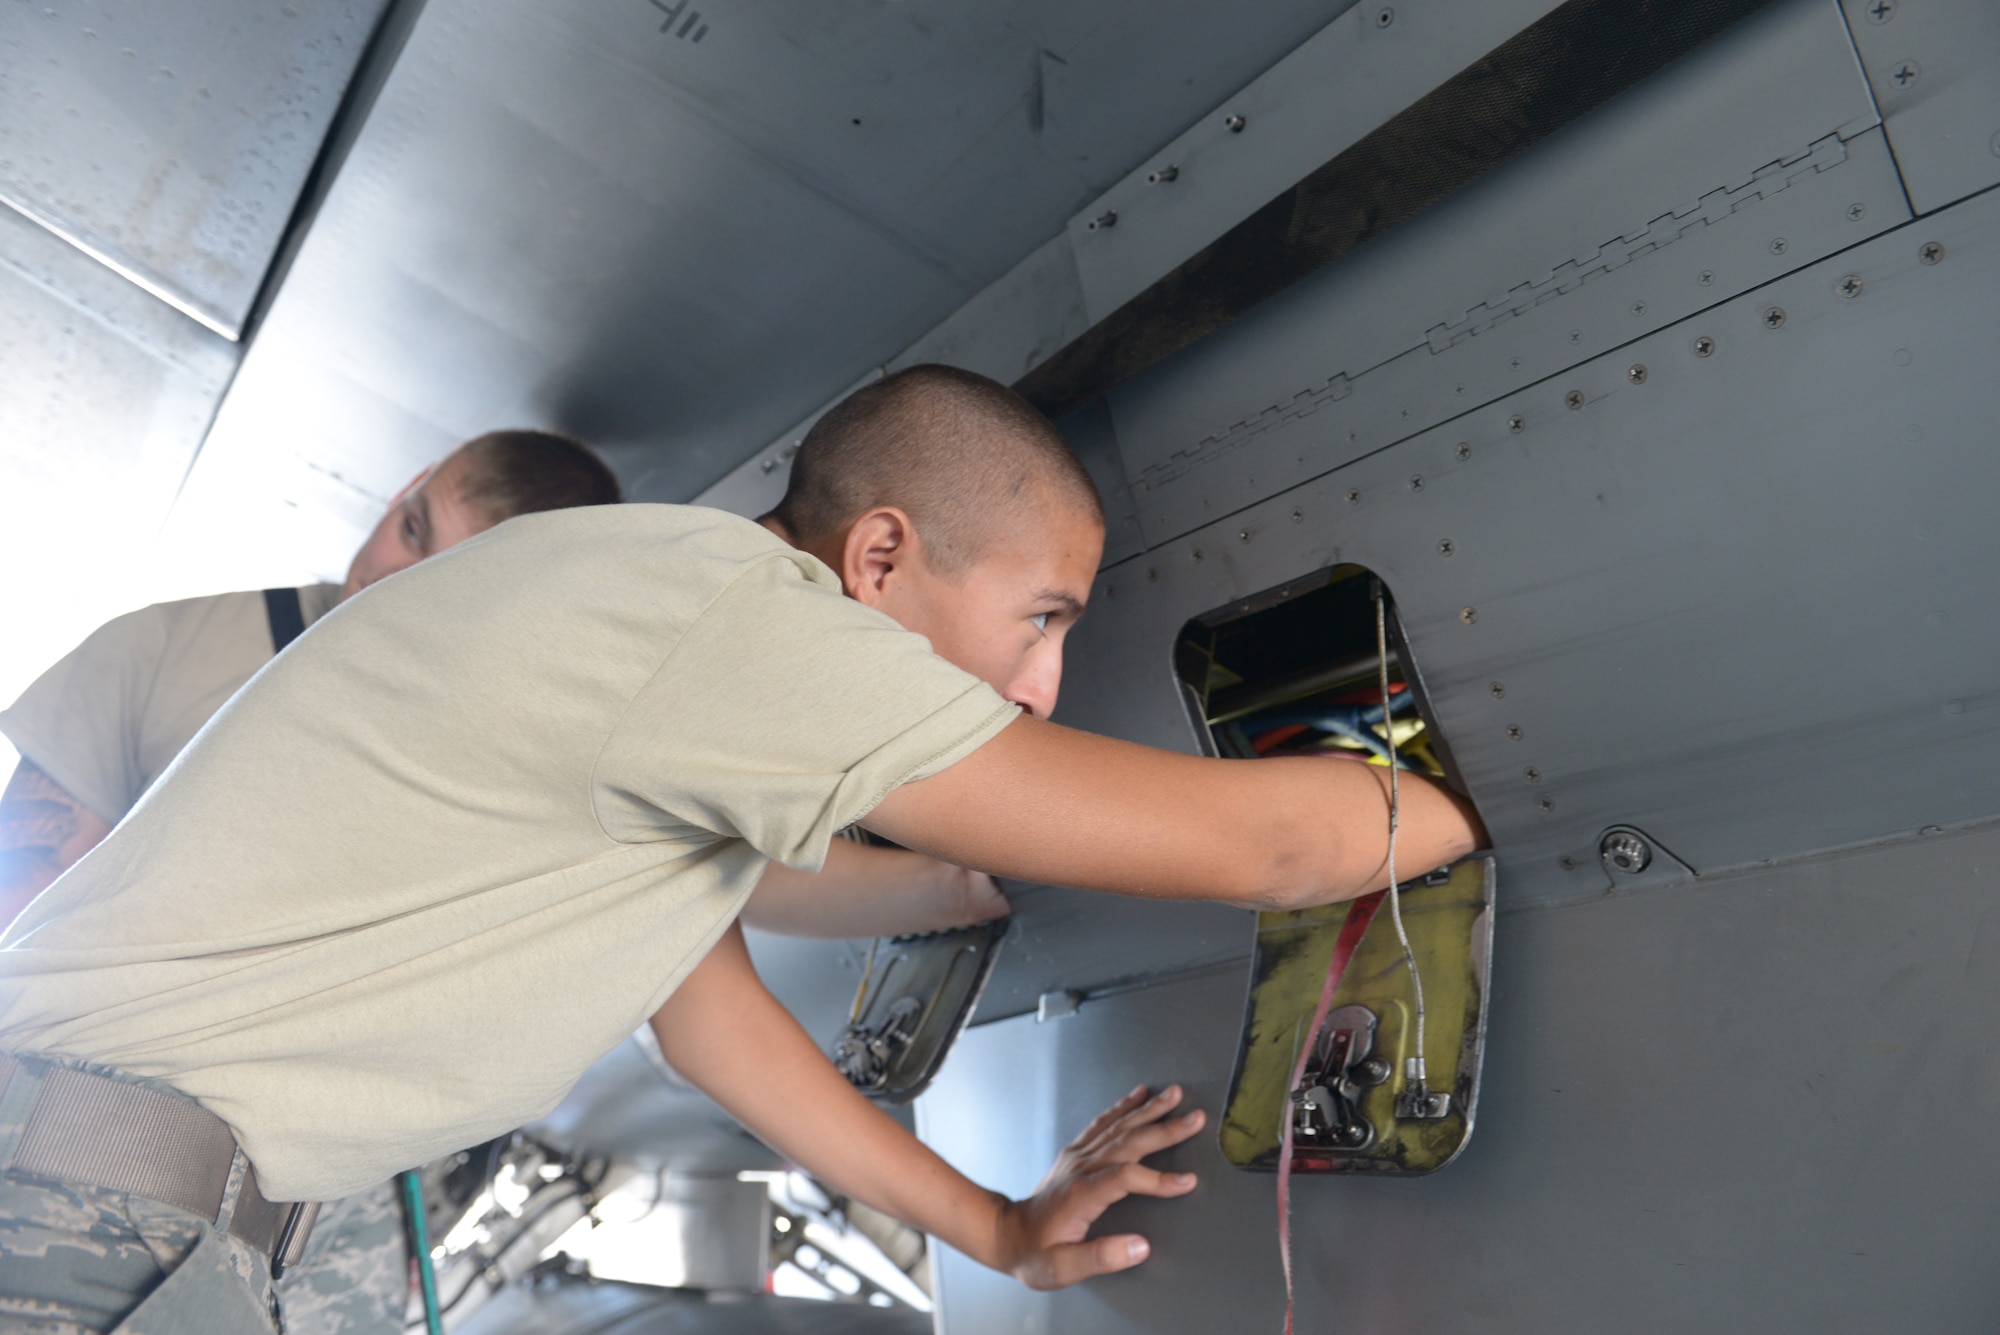 Airman Edgar Avila, 57th Aircraft Maintenance Squadron Tomahawk Aircraft Maintenance Unit F-16 Fighting Falcon crew chief, performs a throttle control assembly at Nellis Air Force Base, Nev., Sept. 19, 2015. The throttle control assembly is just one of many objectives students of the advanced dedicated crew chief class will learn while attending the three-week course, which is hosted by Detachment 13, 372nd Training Squadron. (U.S. Air Force photo by Airman 1st Class Rachel Loftis)